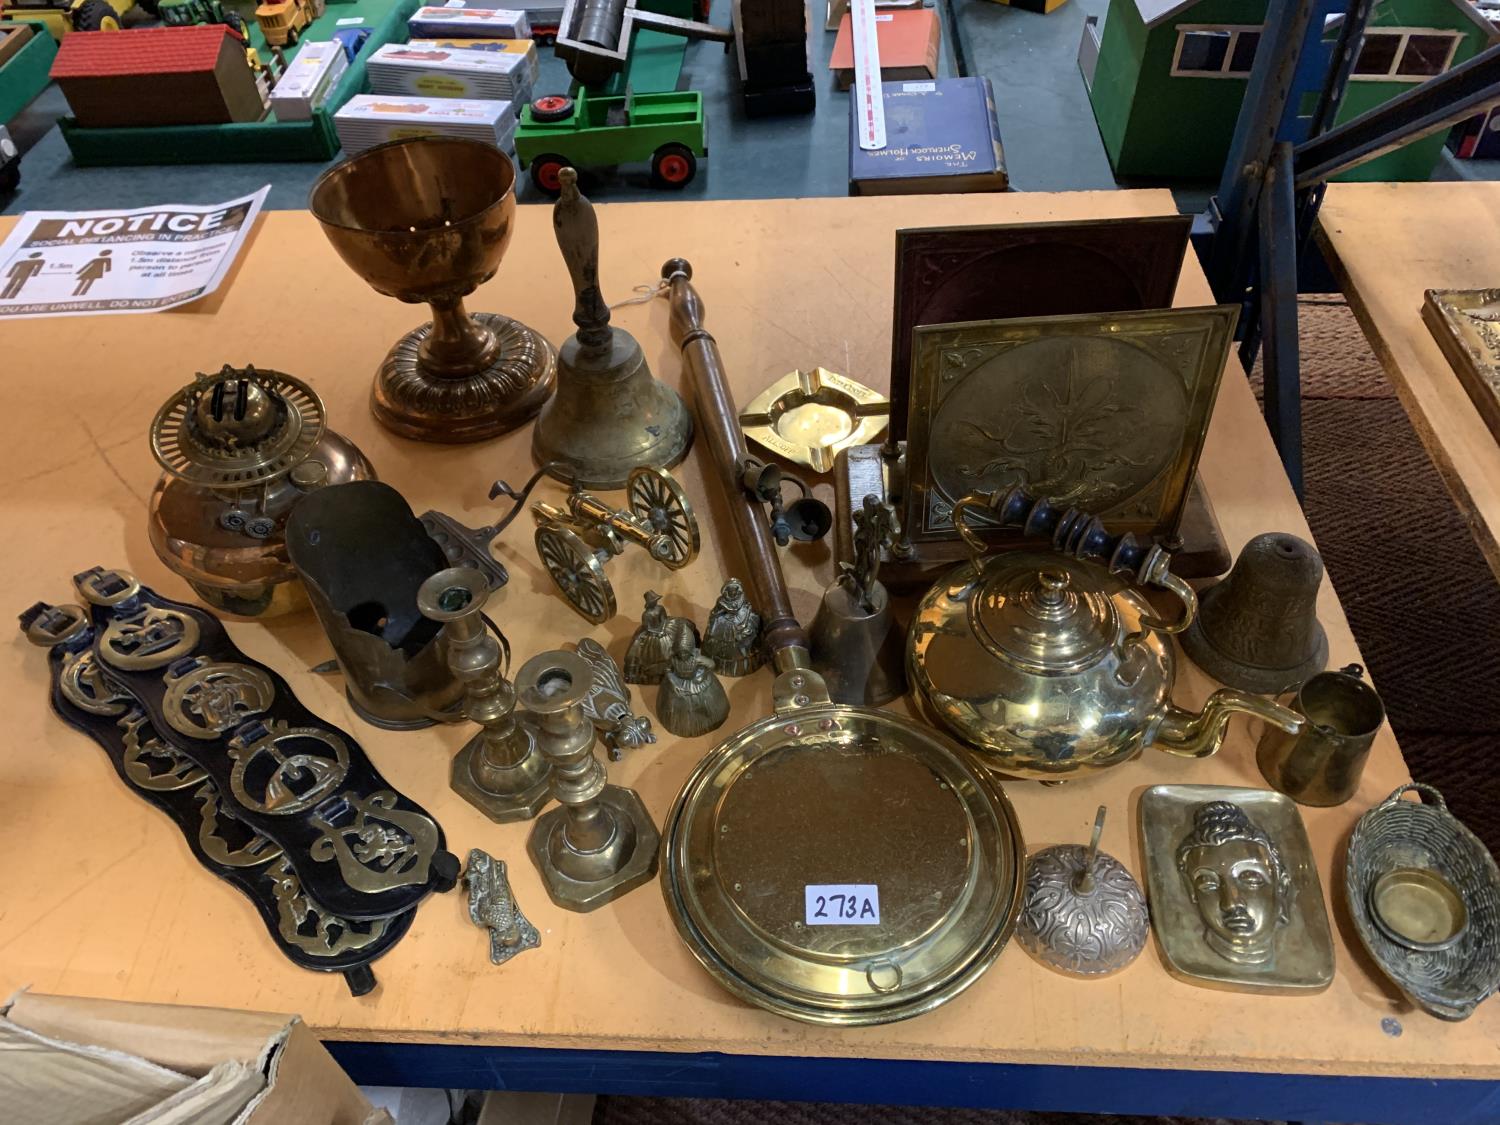 A LARGE QUANTITY OF BRASSWARE TO INCLUDE A BELL, HORSE BRASSES, KETTLE, CANDLESTICKS, CANNON, LAMP - Image 2 of 12